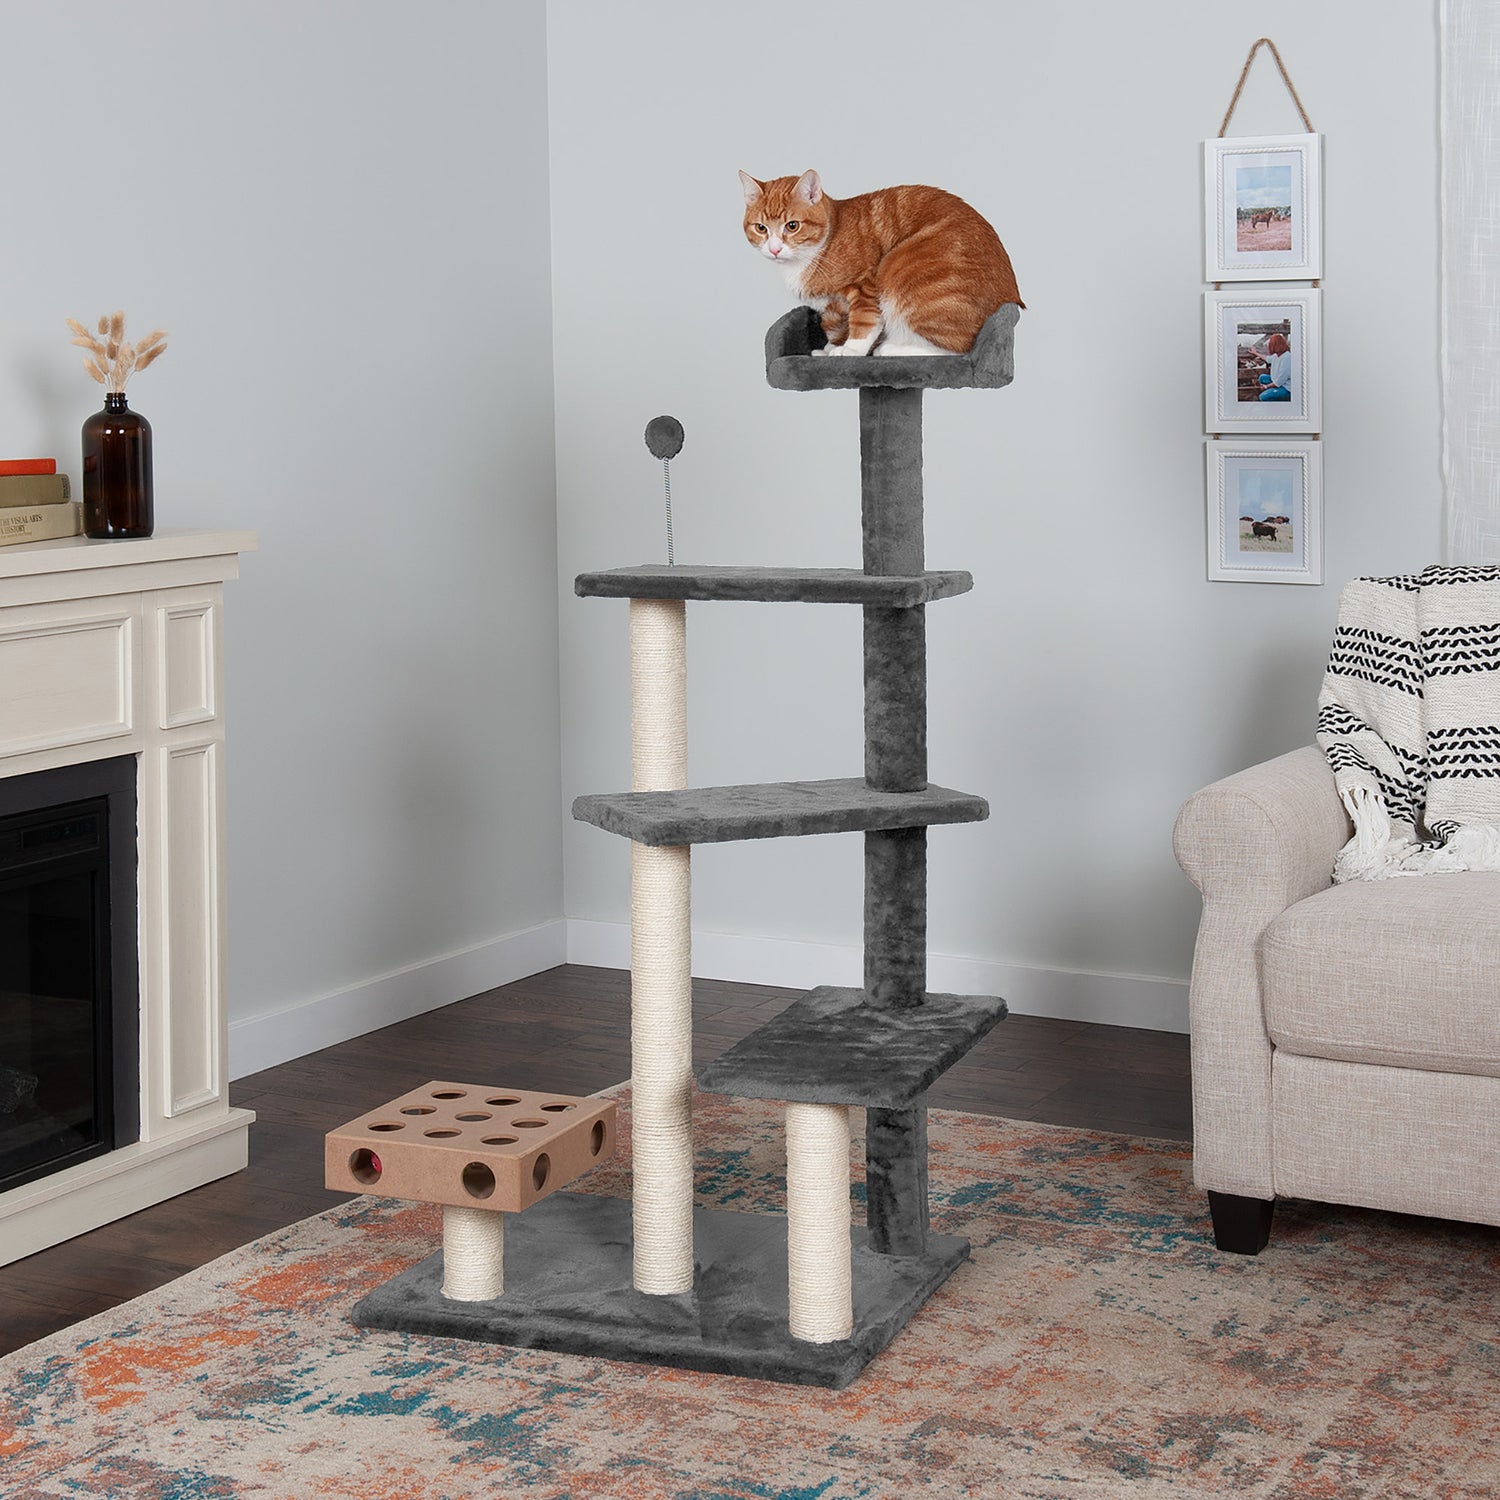 Furhaven Pet Cat Tree | Tiger Tough Cat Tree House Furniture for Cats & Kittens, Play Stairs, Gray